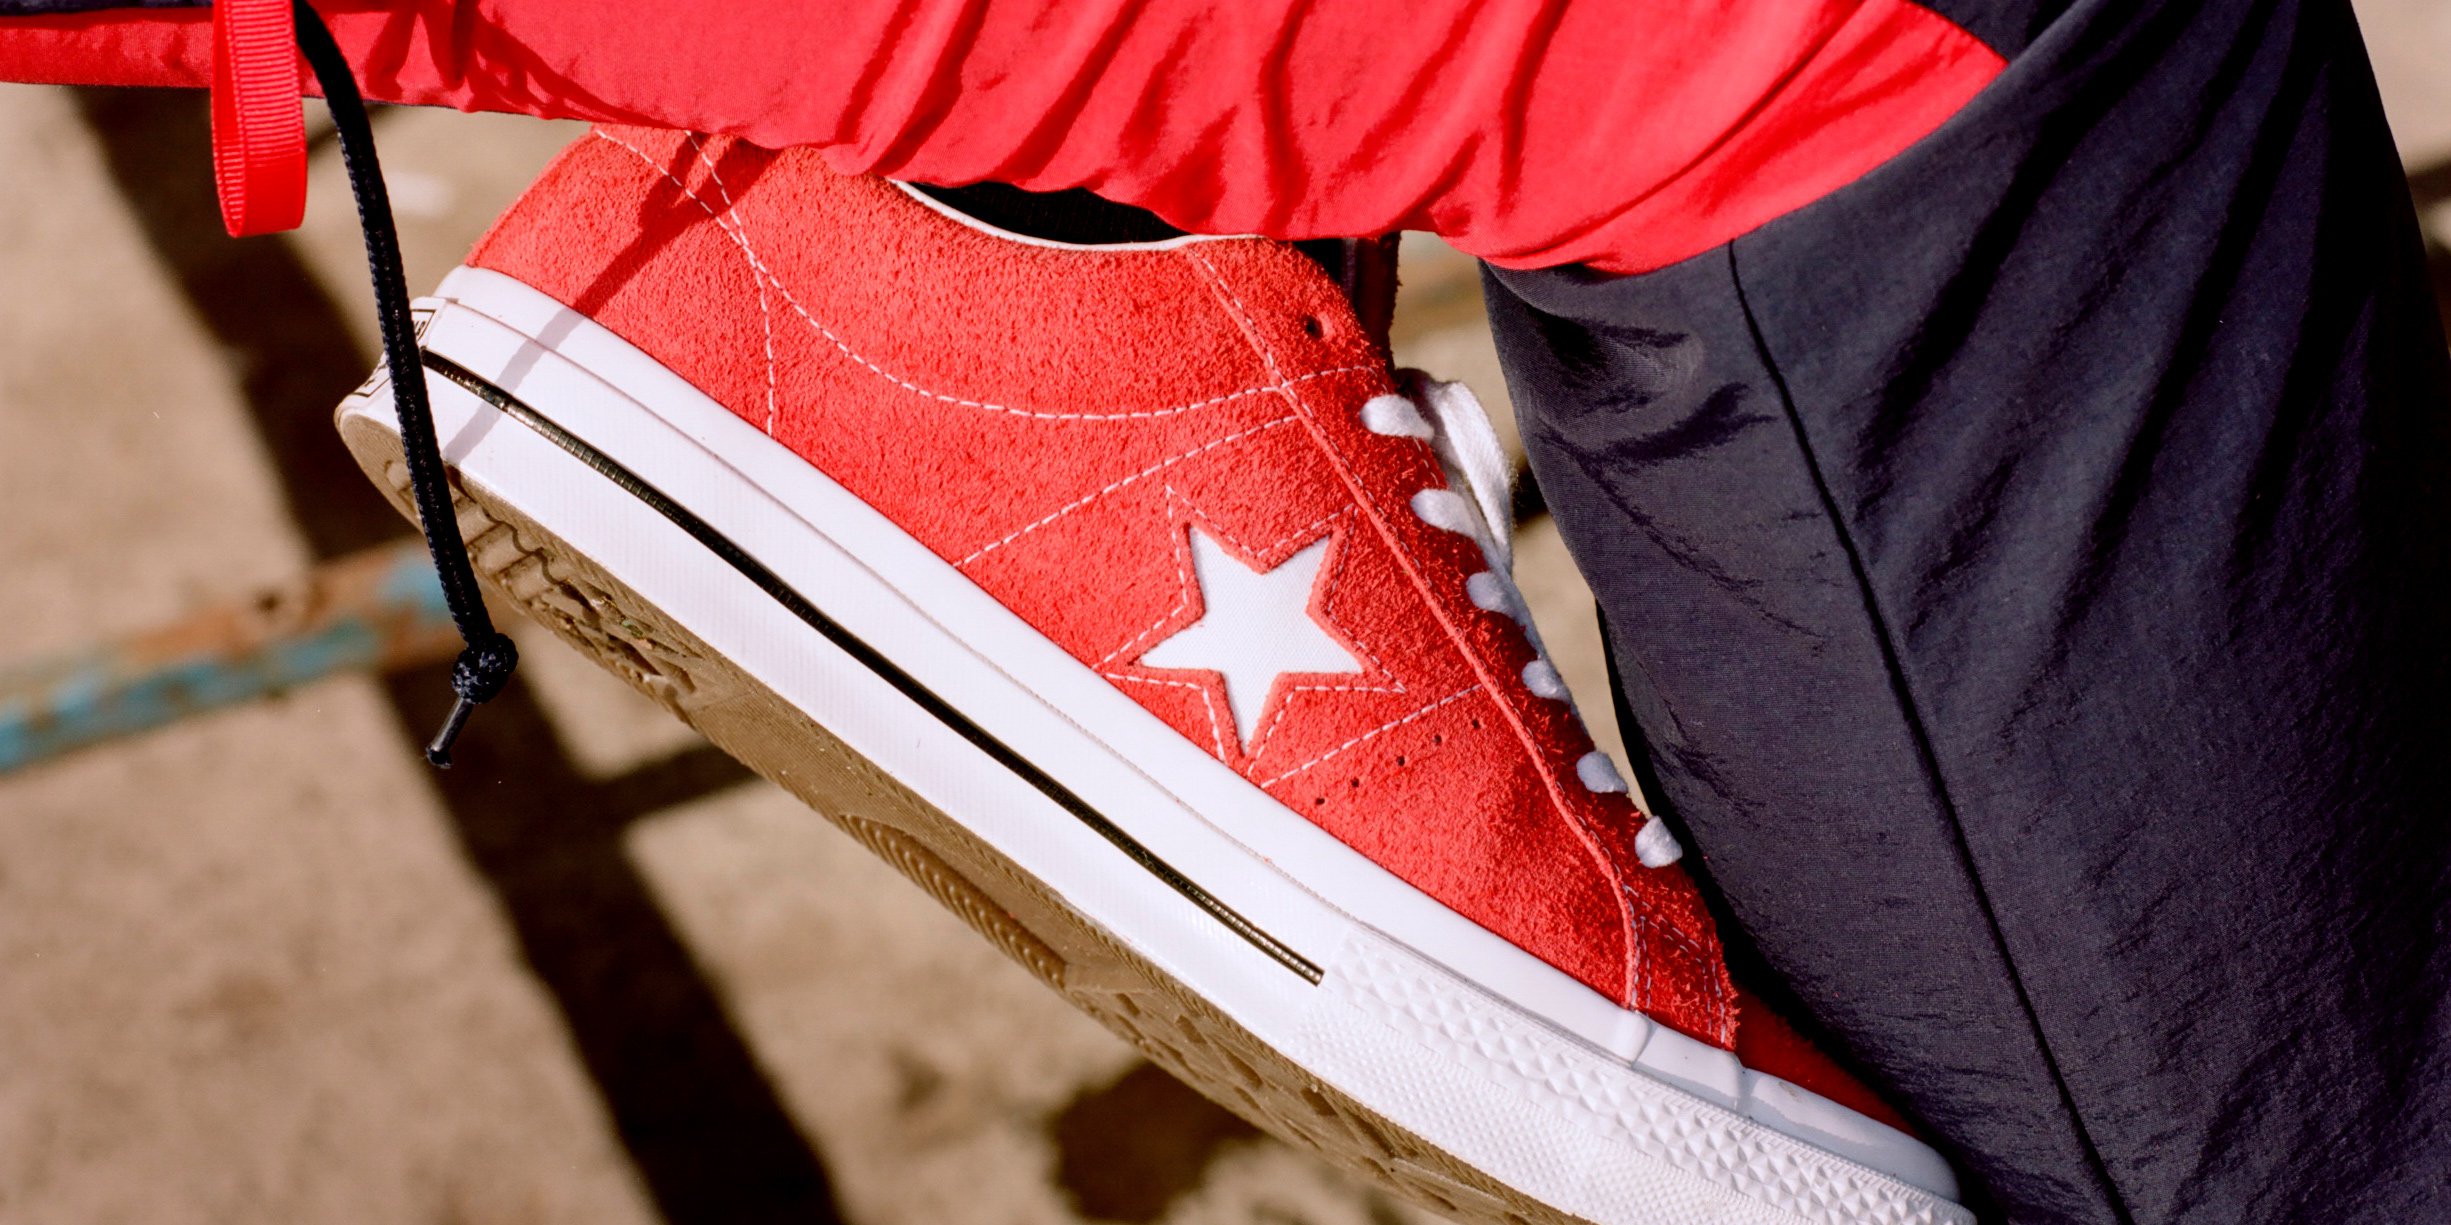 film Auto Accepteret SNS on Twitter: "Sneakersnstuff presents the Converse One Star.  https://t.co/wF91K0q8ly https://t.co/uaKGebASKC" / Twitter